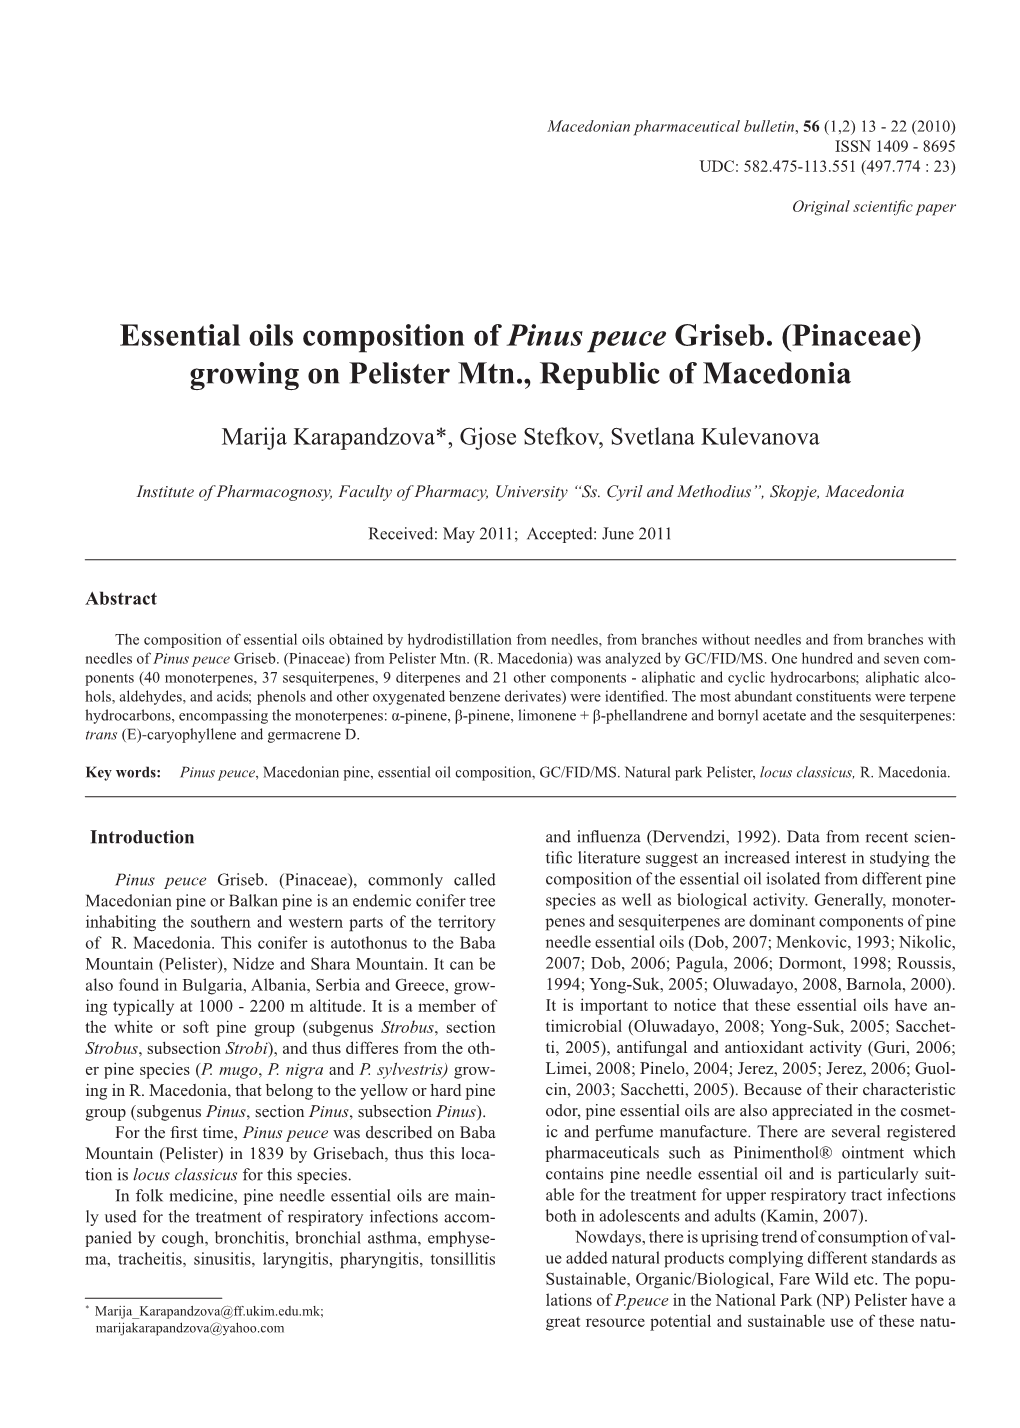 Essential Oils Composition of Pinus Peuce Griseb. (Pinaceae) Growing on Pelister Mtn., Republic of Macedonia